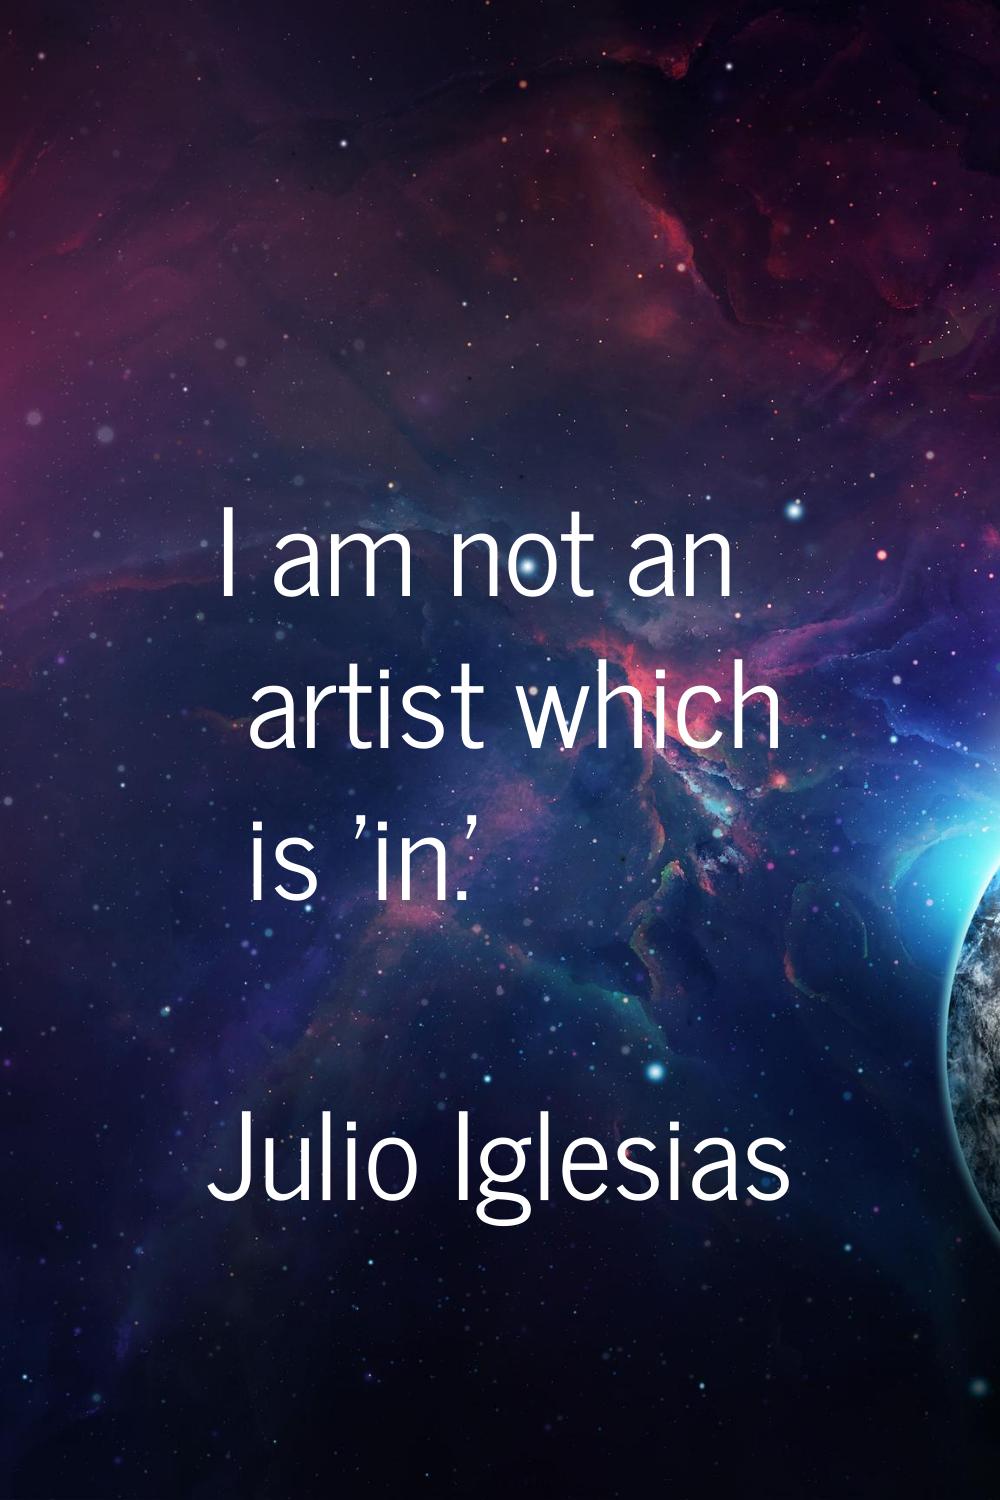 I am not an artist which is 'in.'